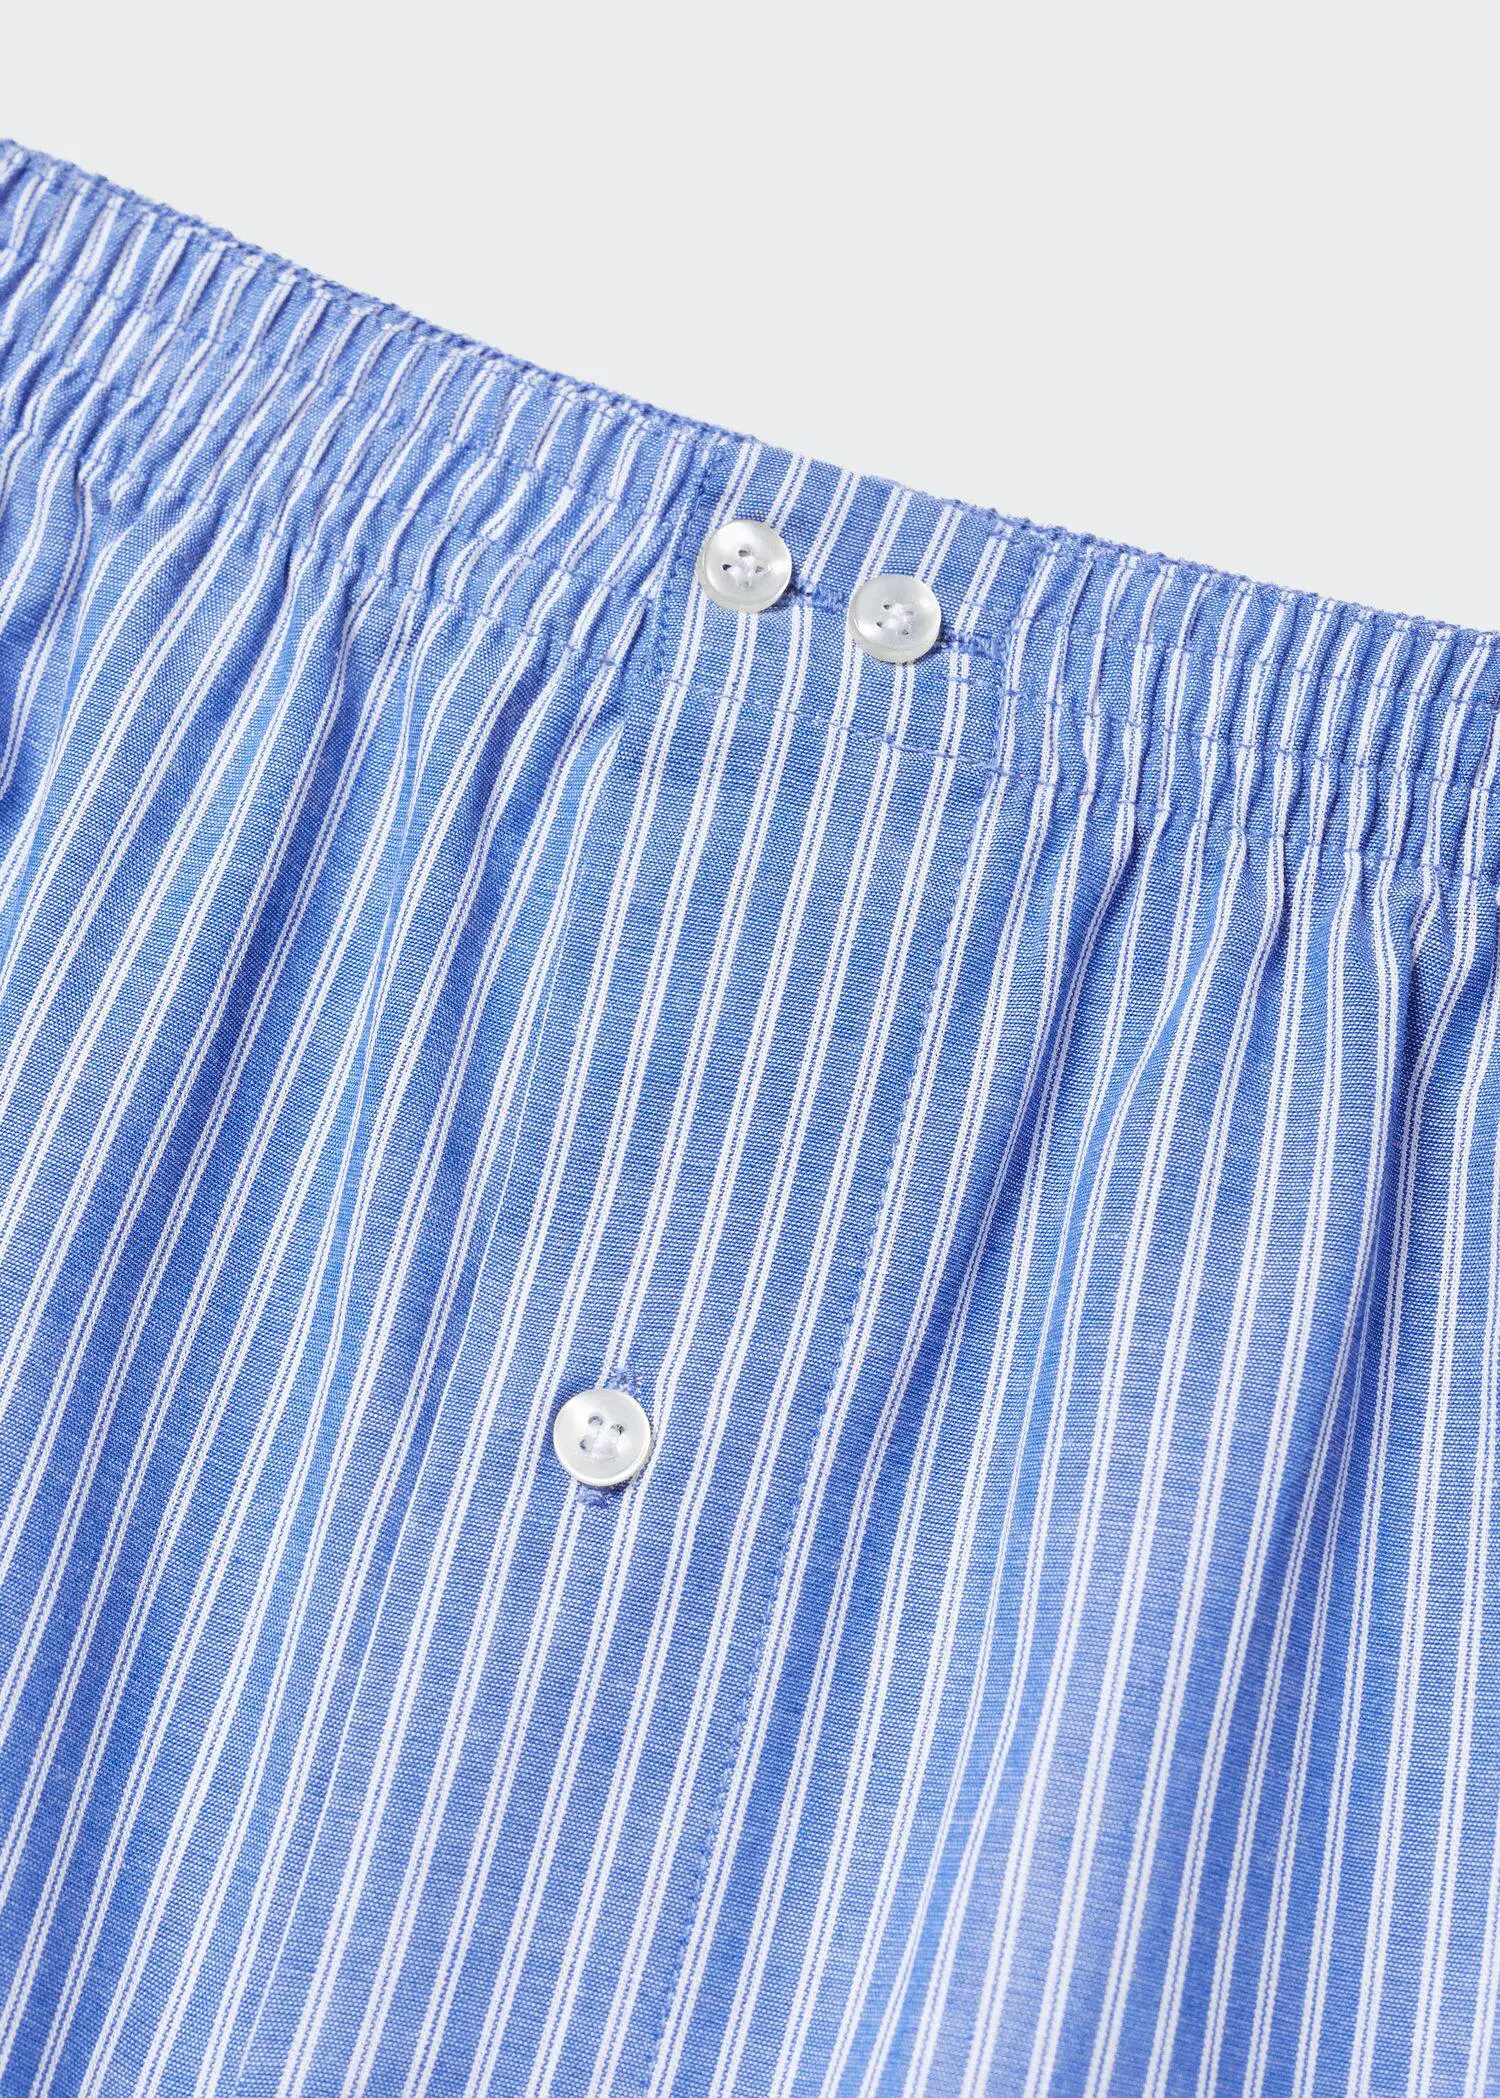 Mango 100% cotton striped briefs. a close up view of the buttons on the boxers. 